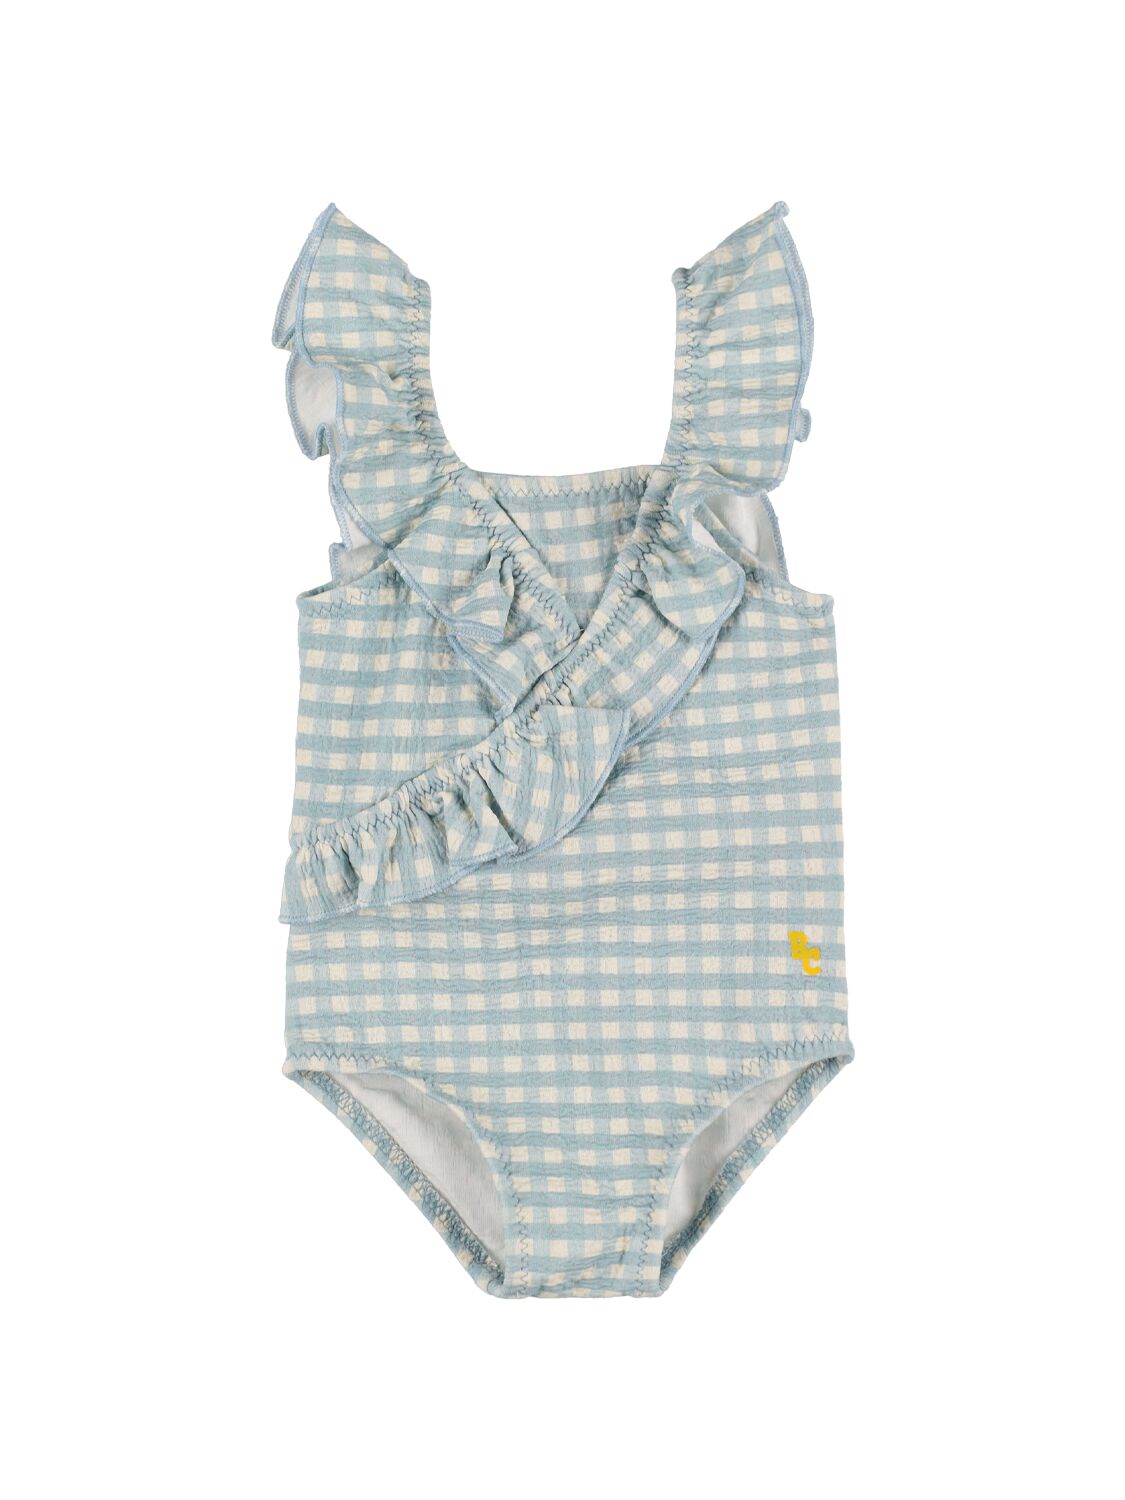 Bobo Choses Babies' Printed Lycra One Piece Swimsuit In Blue,white